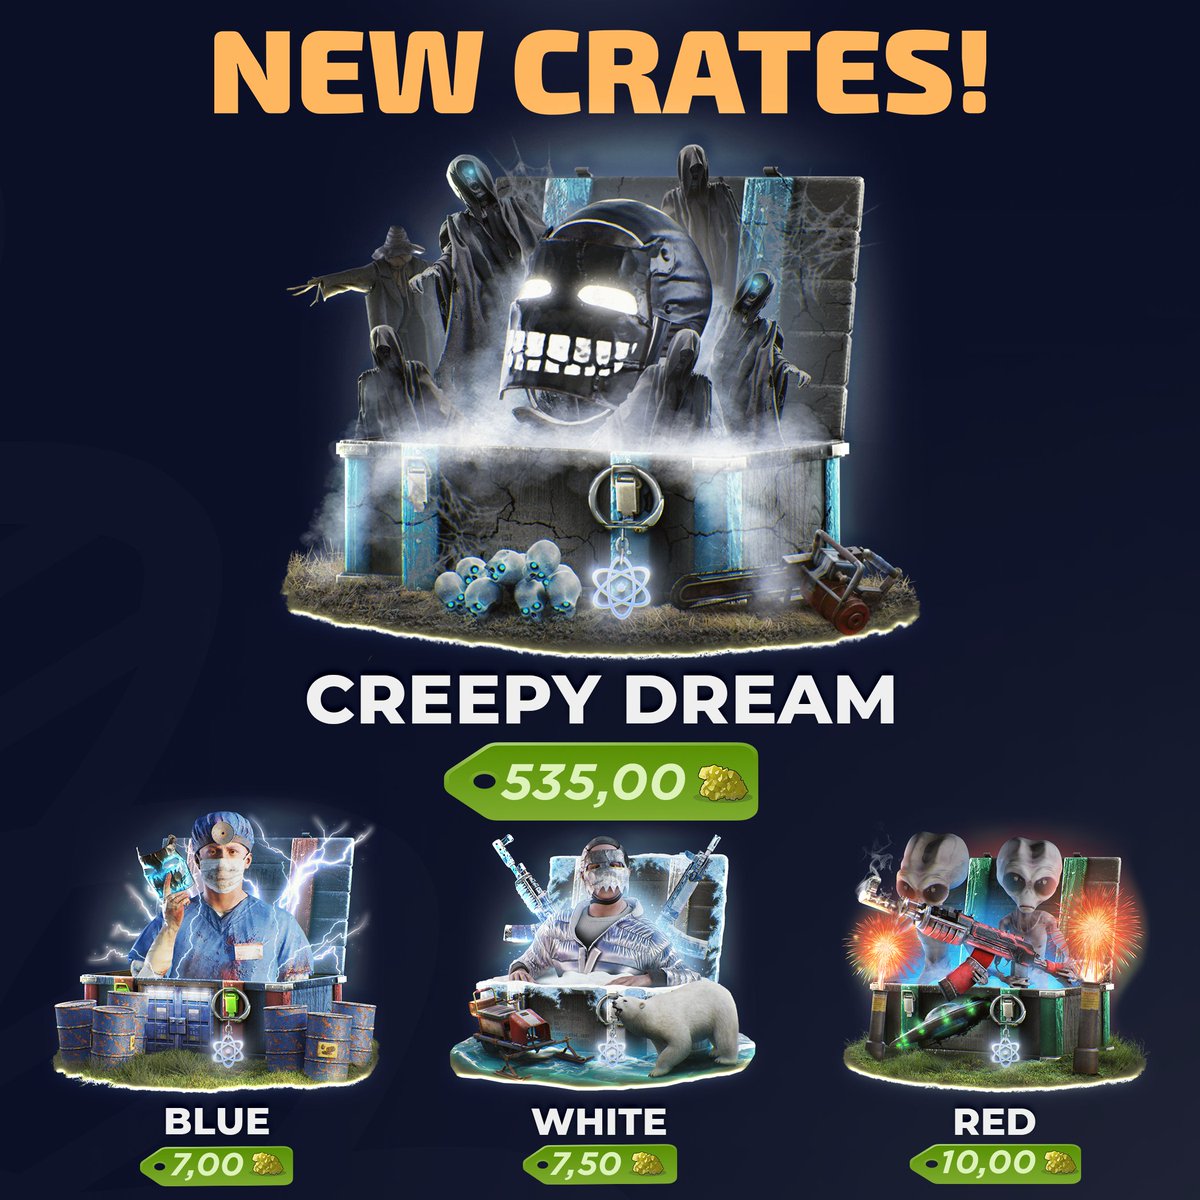 🎉 4 NEW Crates are now available on Cobalt Lab! Dive in and explore our latest additions 📝 Share your ideas about what you'd like to see in the next crates in the comments